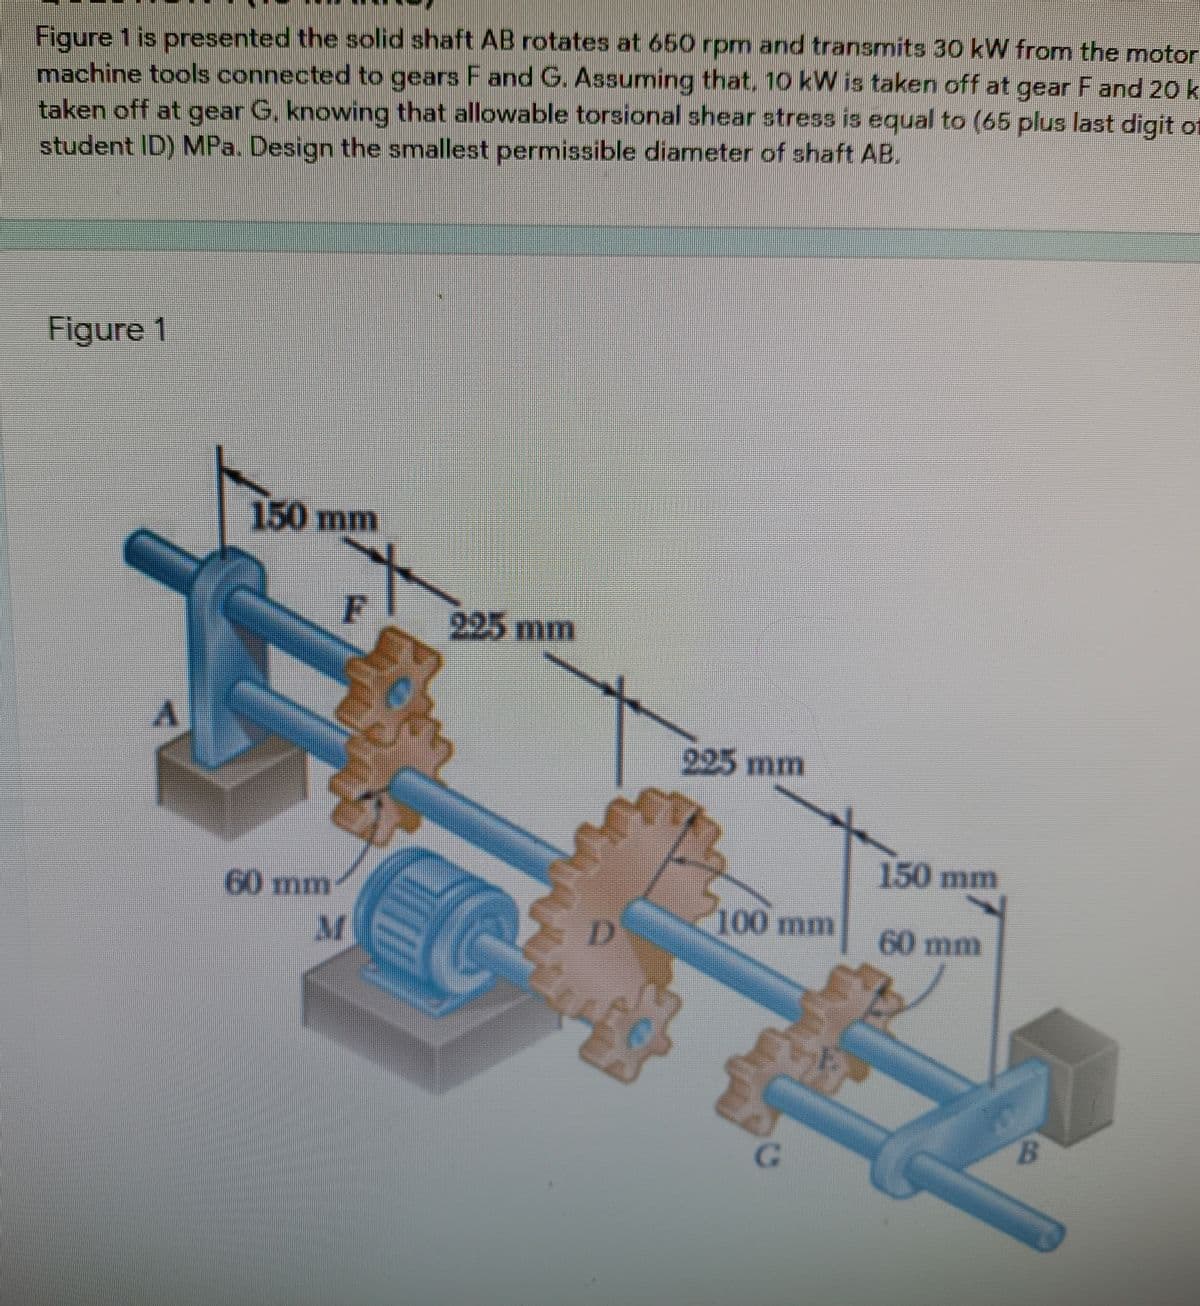 Figure 1 is presented the solid shaft AB rotates at 650 rpm and transmits 30 kW from the motor
machine tools connected to gears F and G. Assuming that, 10 kW is taken off at gear F and 20 k
taken off at gear G, knowing that allowable torsional shear stress is equal to (65 plus last digit of
student ID) MPa. Design the smallest permissible diameter of shaft AB.
Figure 1
150 mm
225 mm
905 mm
150 mm
60 mm
100 mm
D.
60 mm
B.
